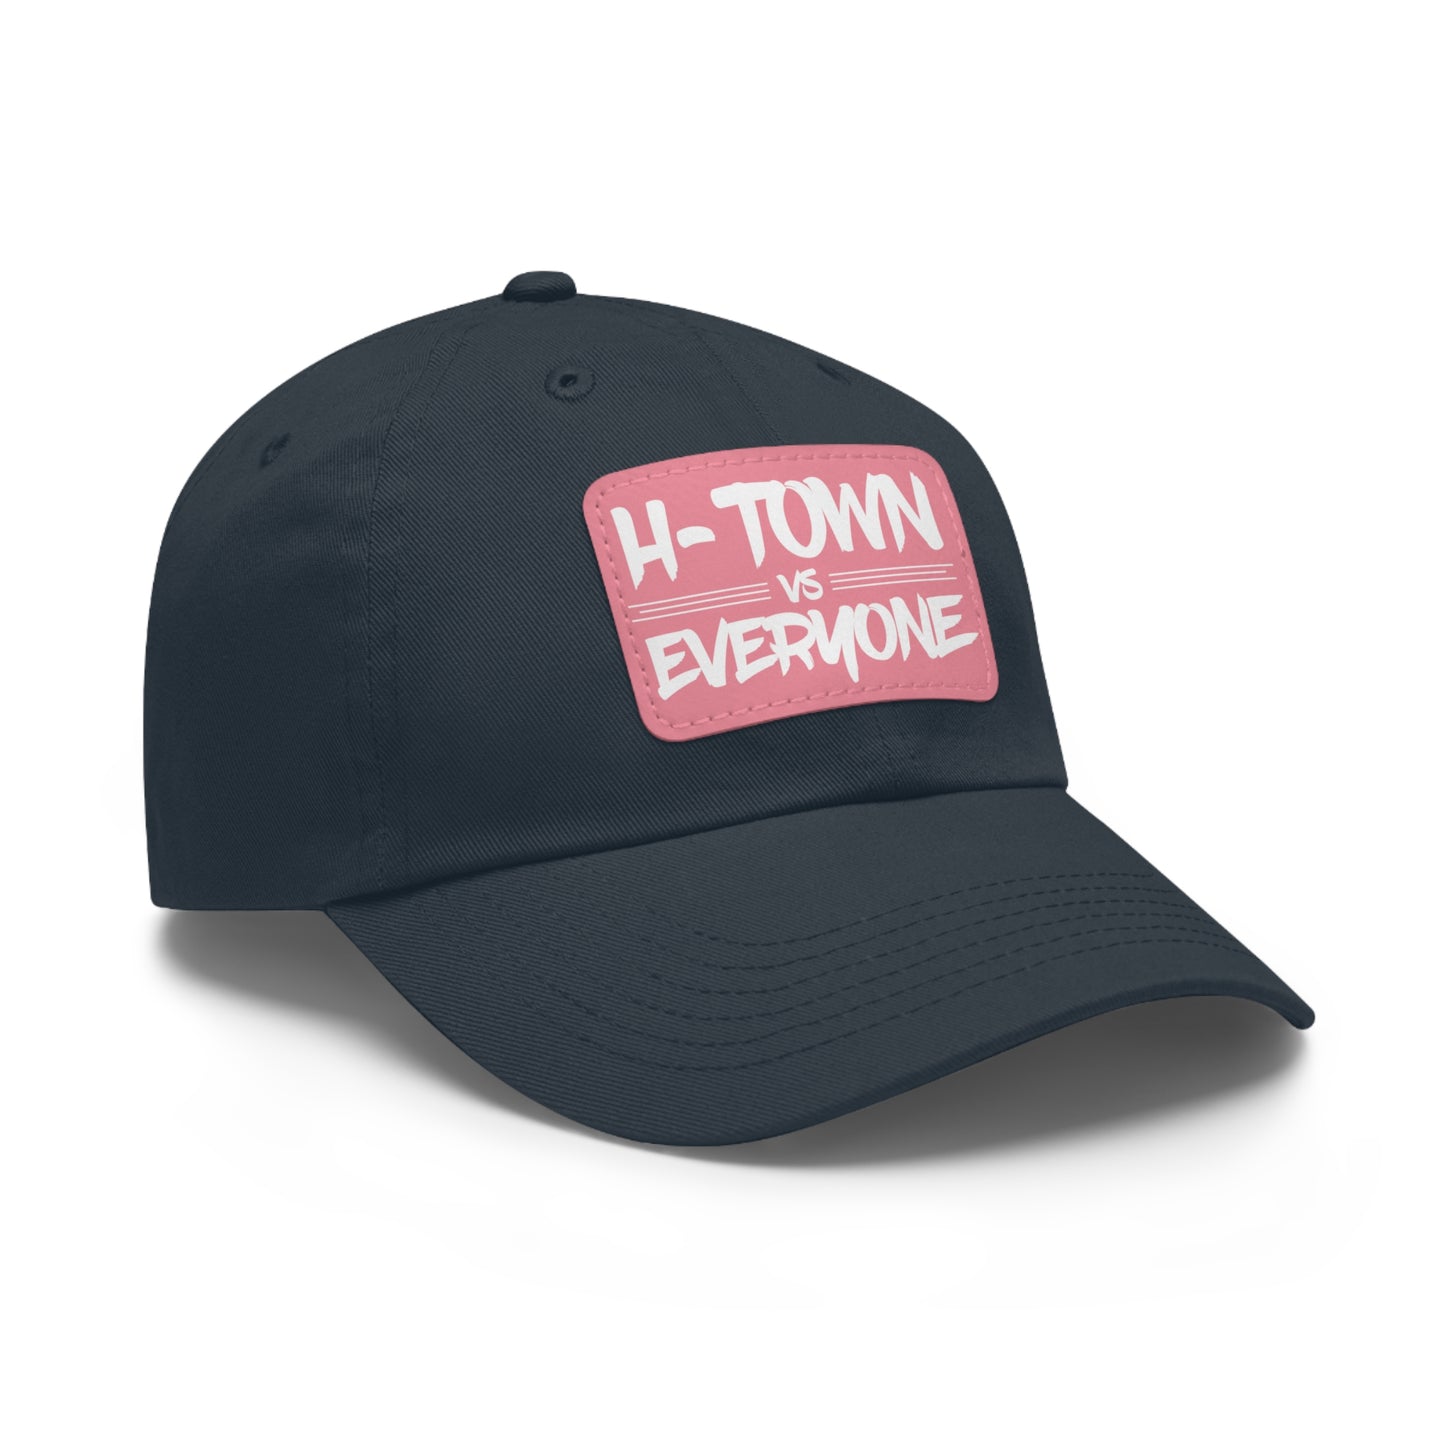 H-Town vs Everyone Leather Patch Dad Hat